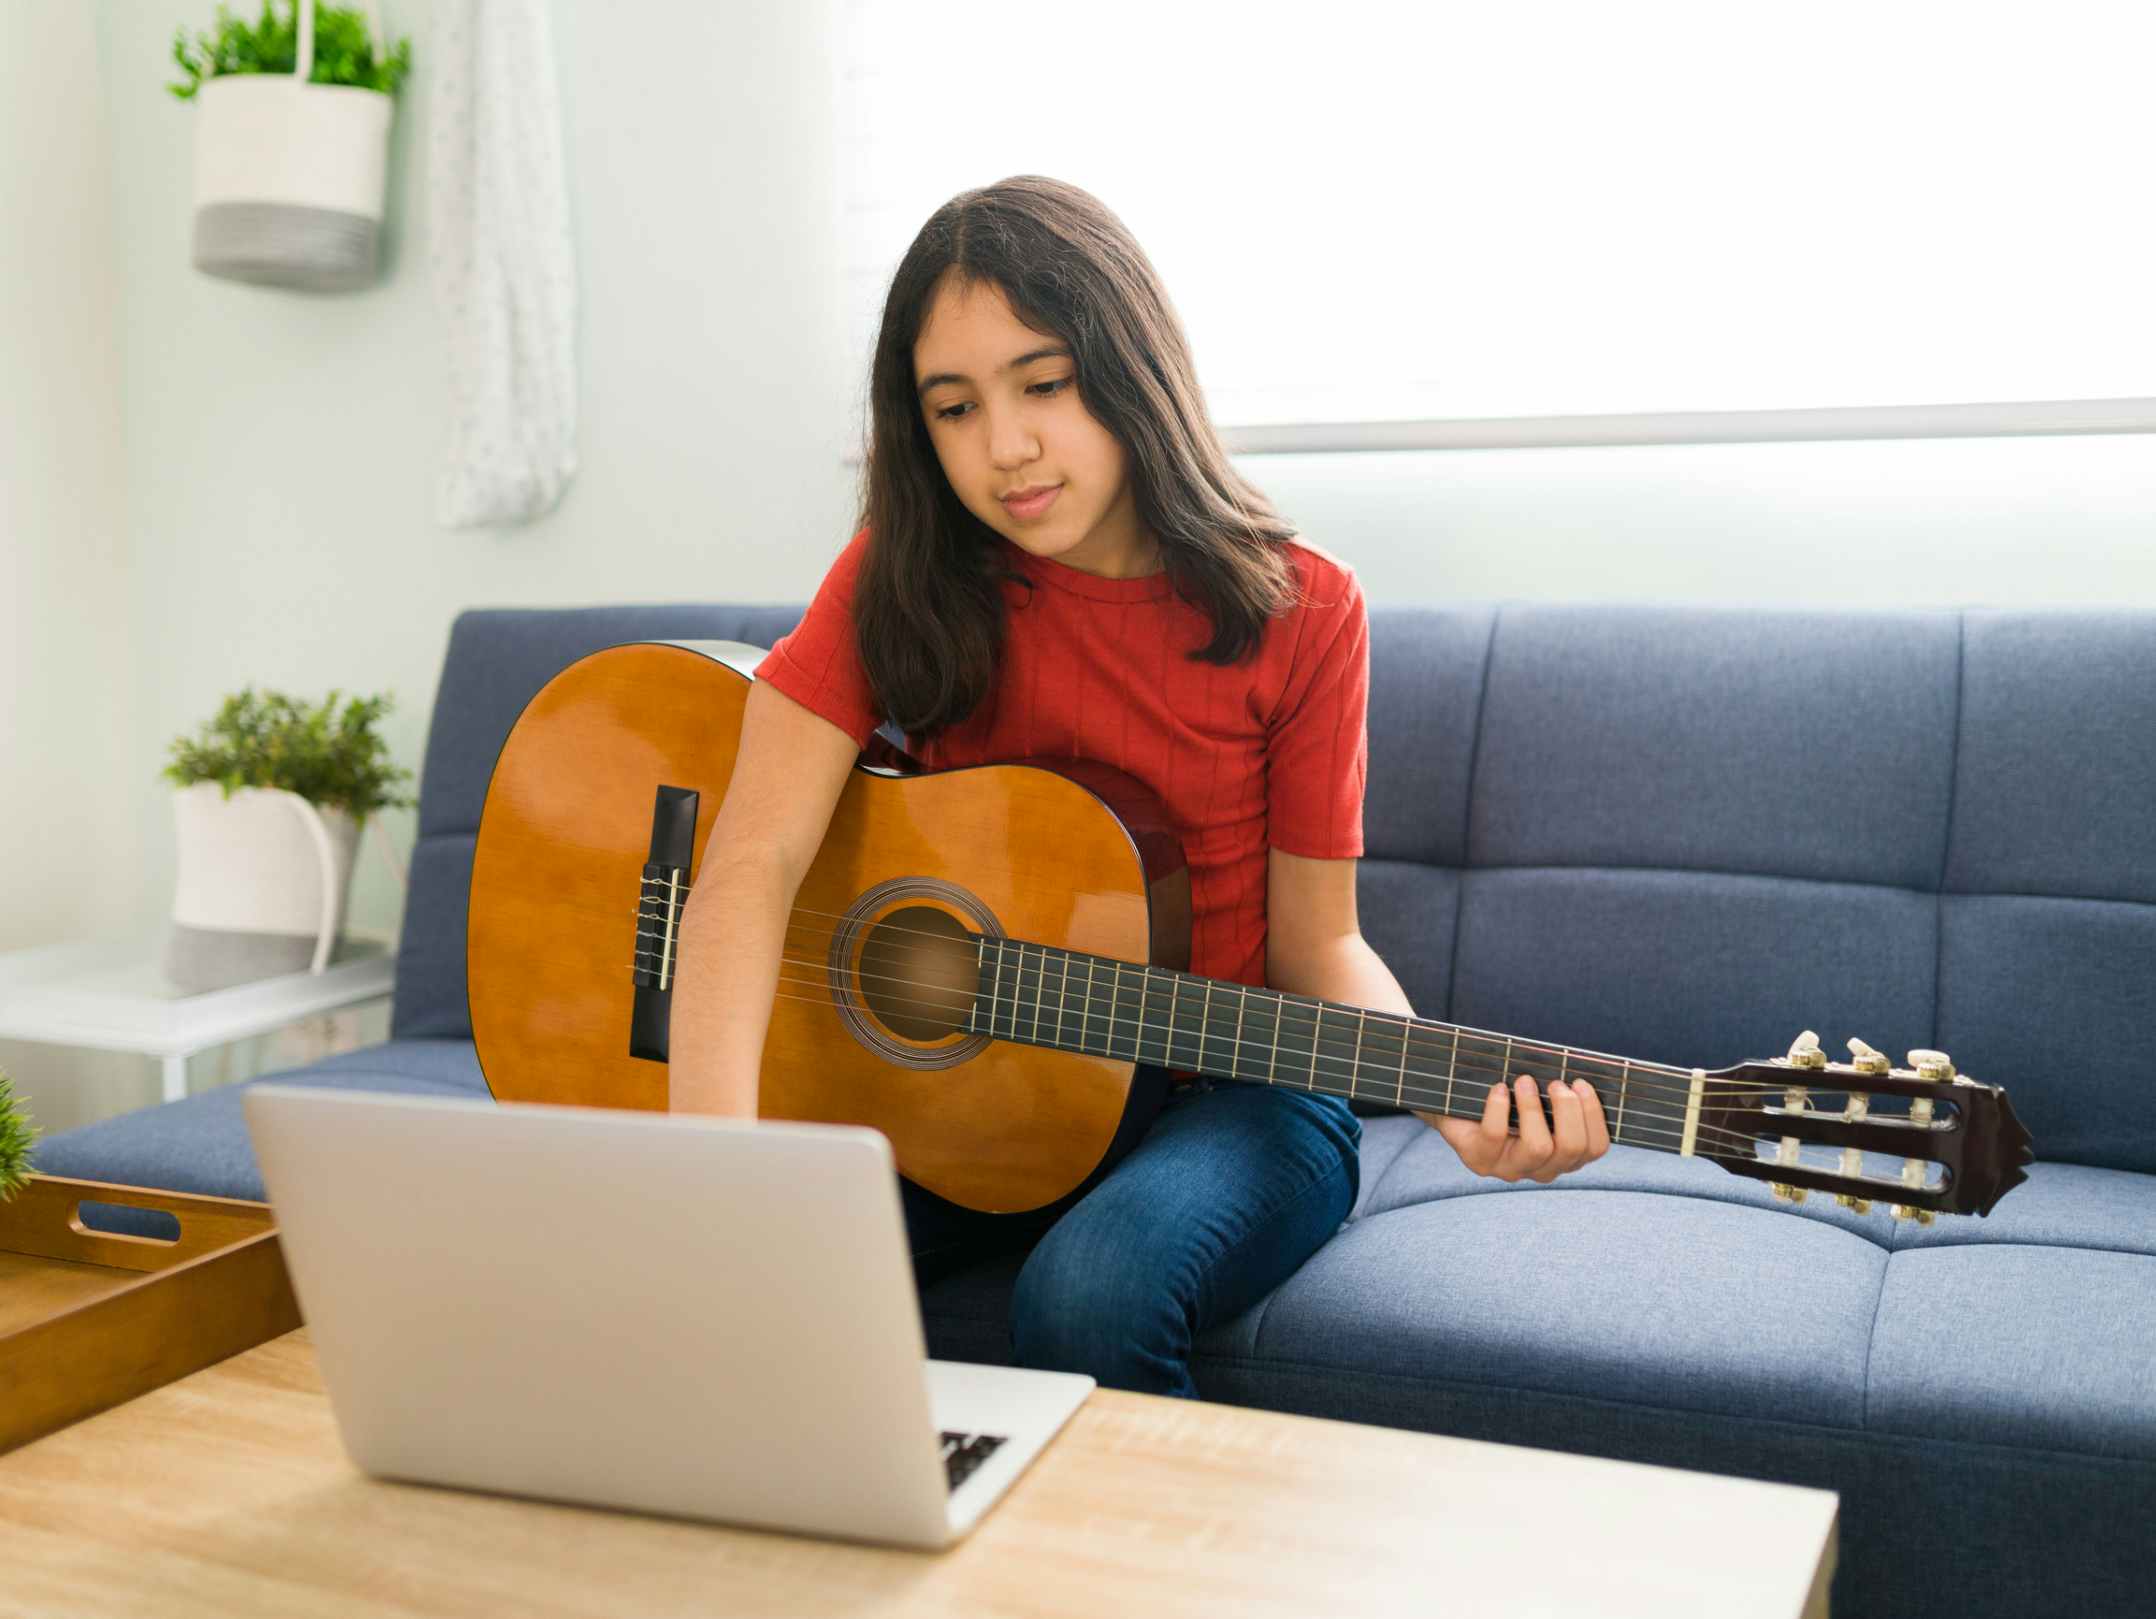 A teen playing guitar and looking at a laptop